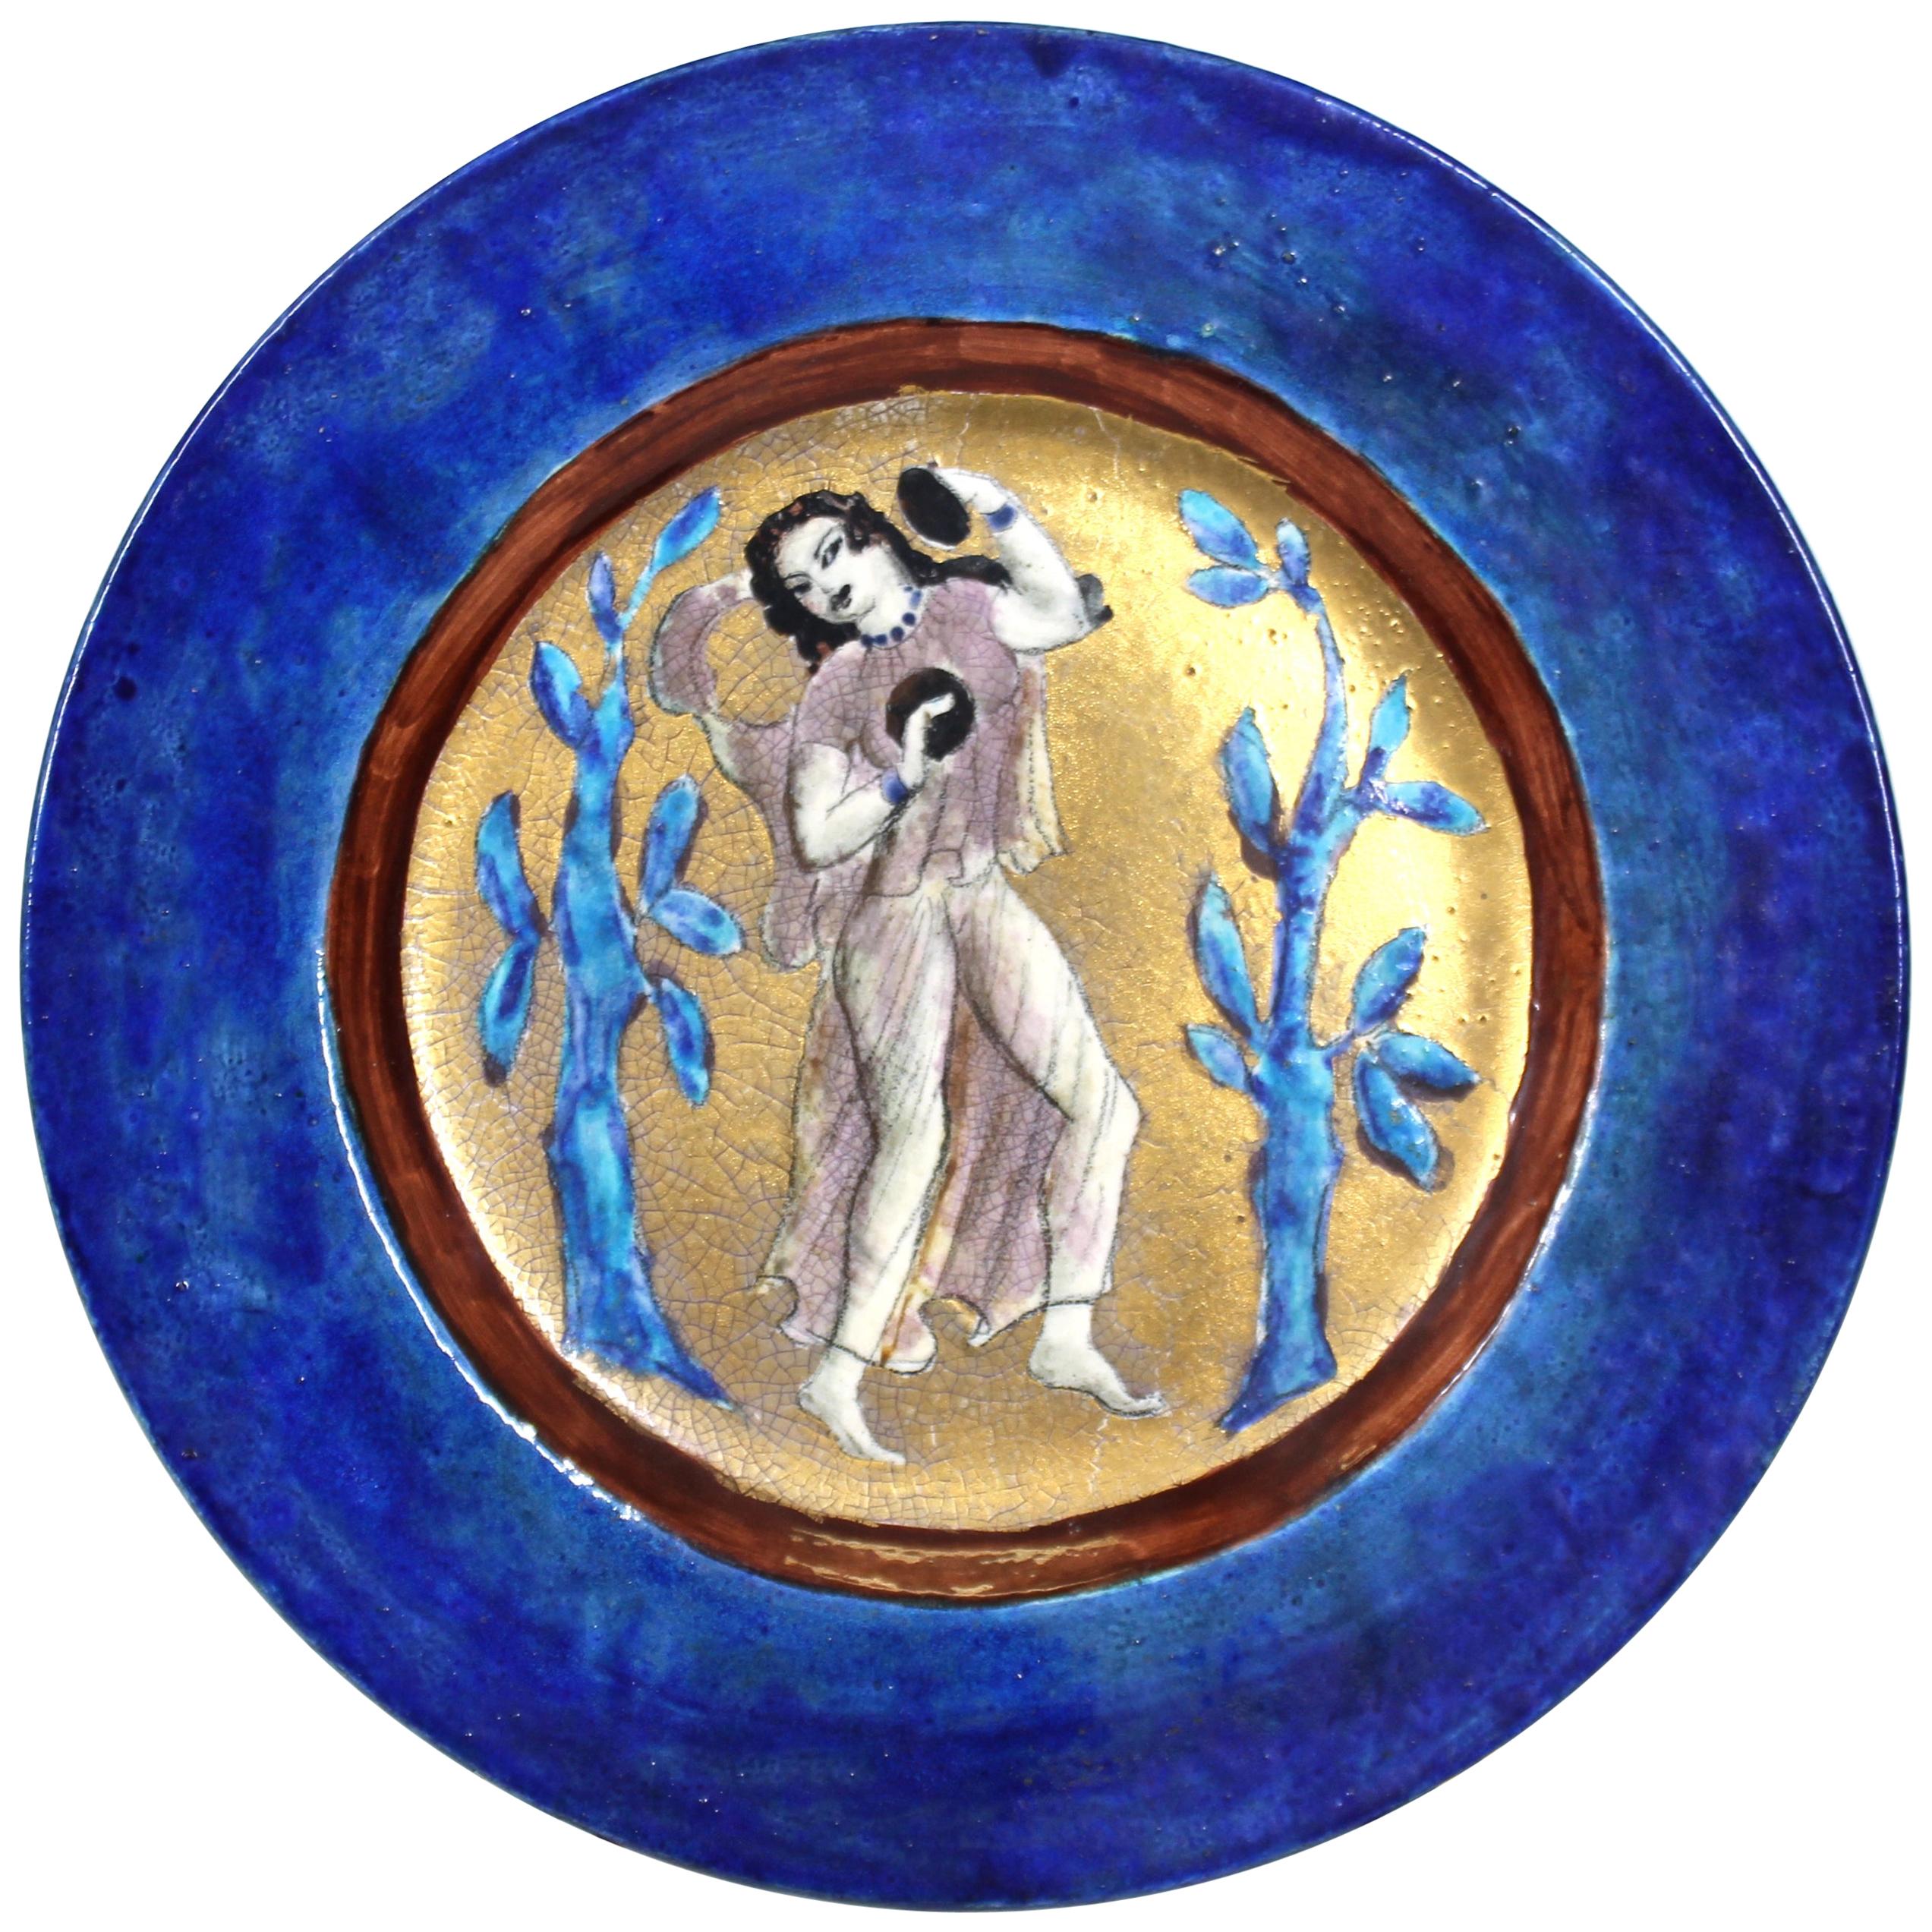 Edith Varian Cockcroft Art Deco Ceramic Charger Plate with Exotic Dancer For Sale